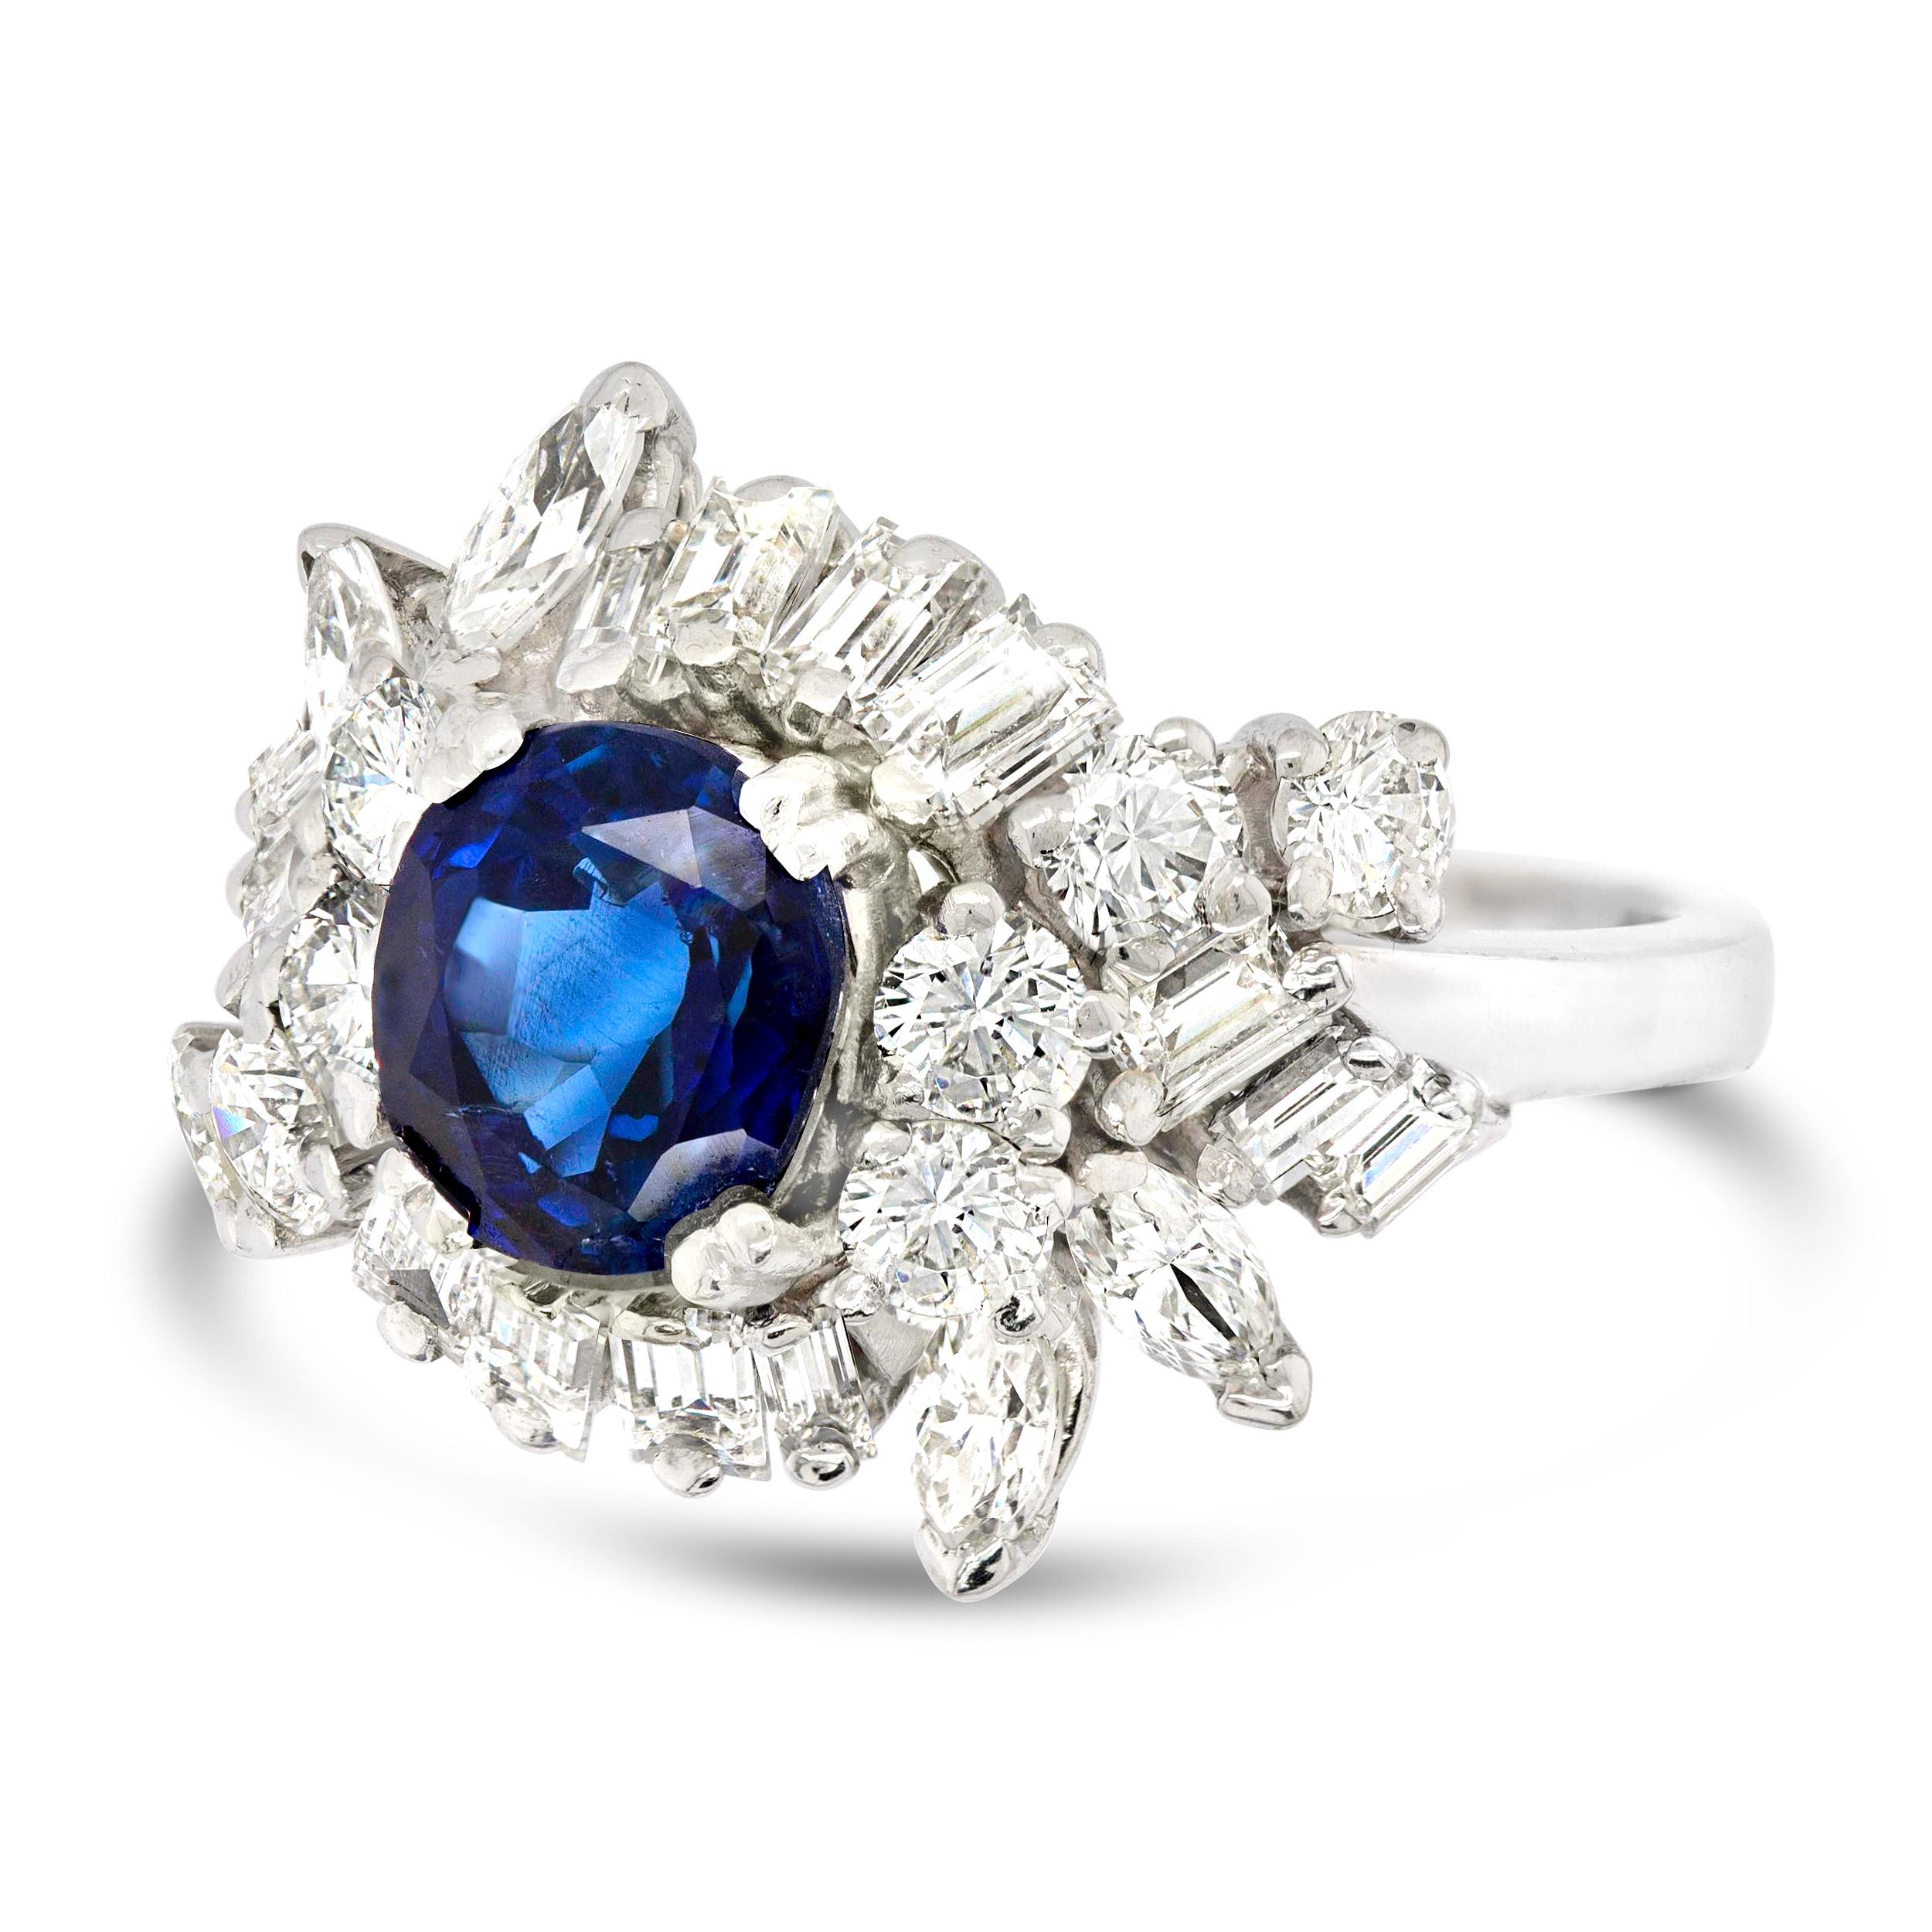 This glamorous Mid-Century cocktail ring is a vintage classic. At the center is a 2.02 carat oval Burmese sapphire with a rich blue hue that’s certified as natural and untreated making the already exceptional stunner a true gem. It’s accented by a